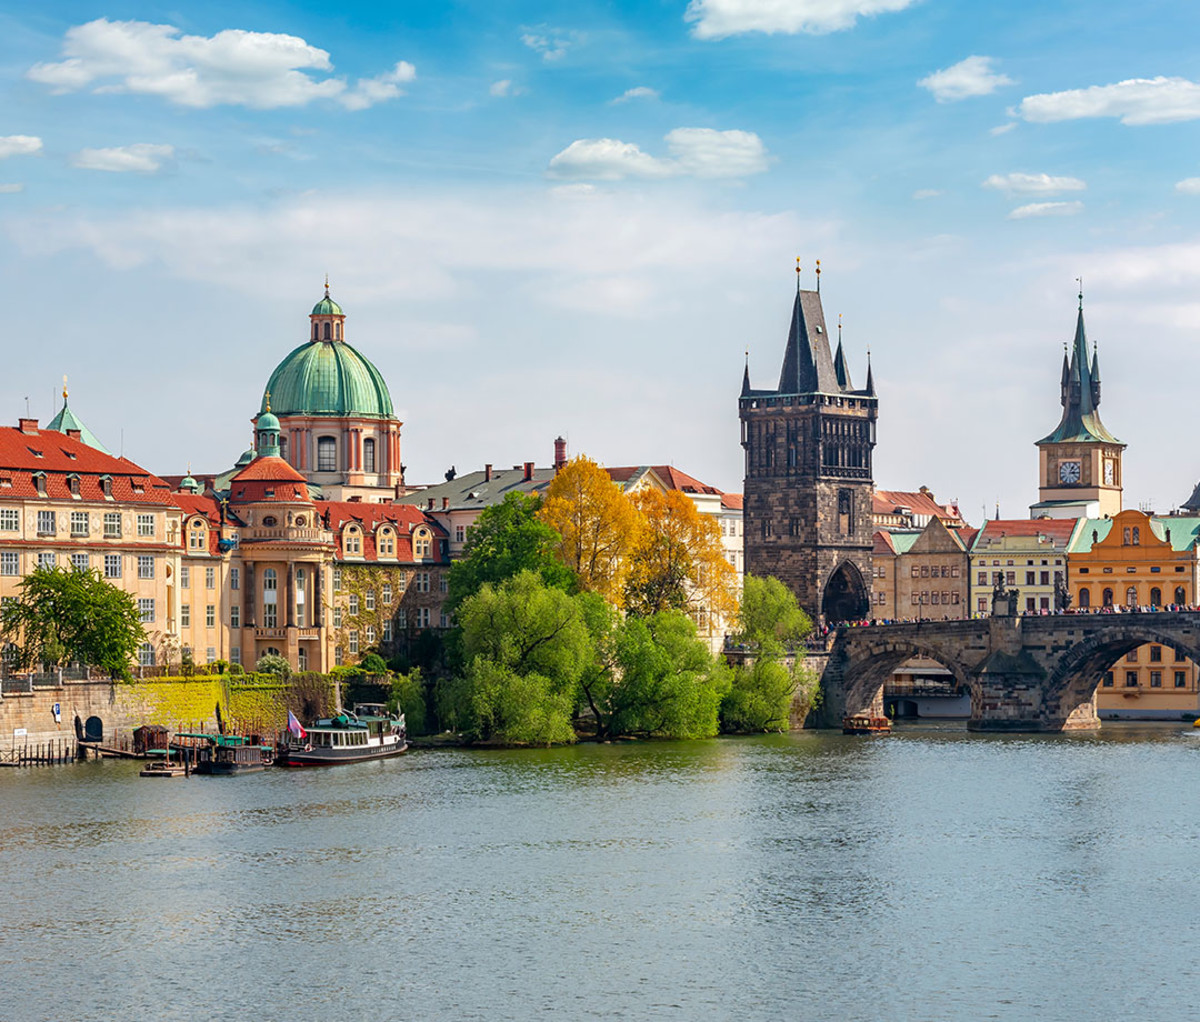 The Vltava river and the Charles bridge beside Old Town Bridge Tower in Prague